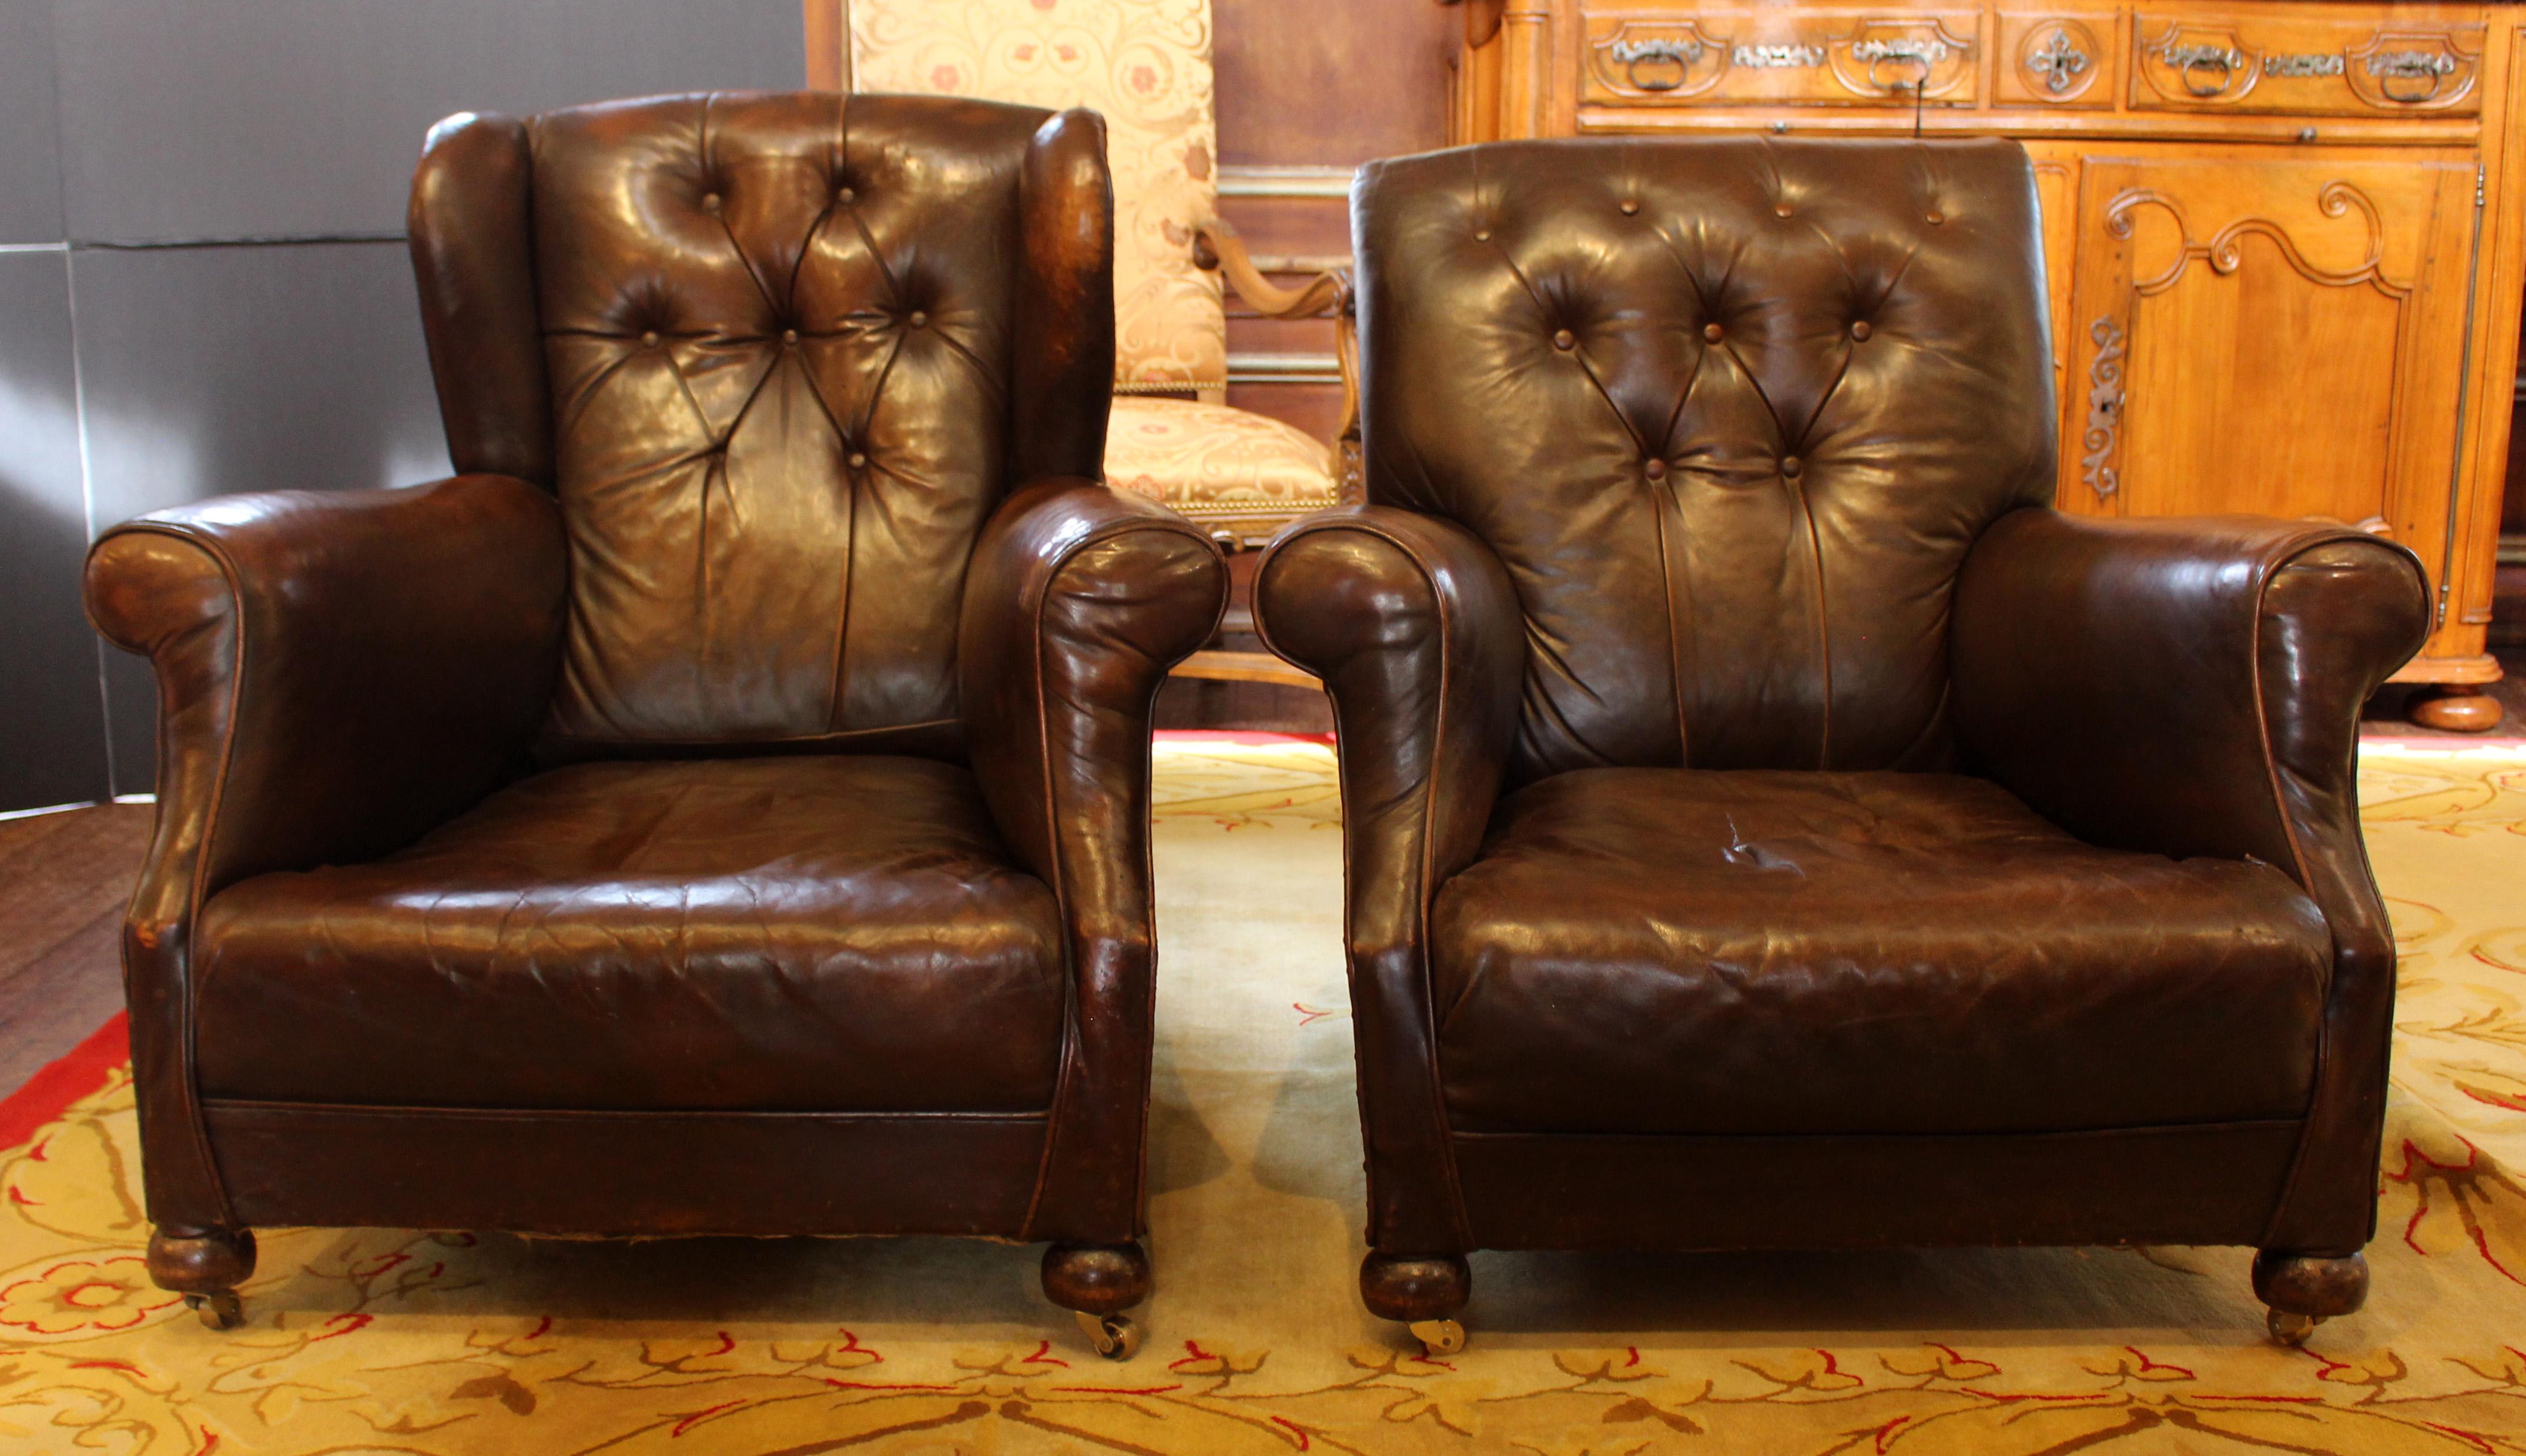 Late 19th century pair of leather club chairs, English. Both with rolled arms, tufted backs, brass studs & bun feet. One with a slight wingback. Original leather. Later casters. One lacks a tufting button. Measures : 39